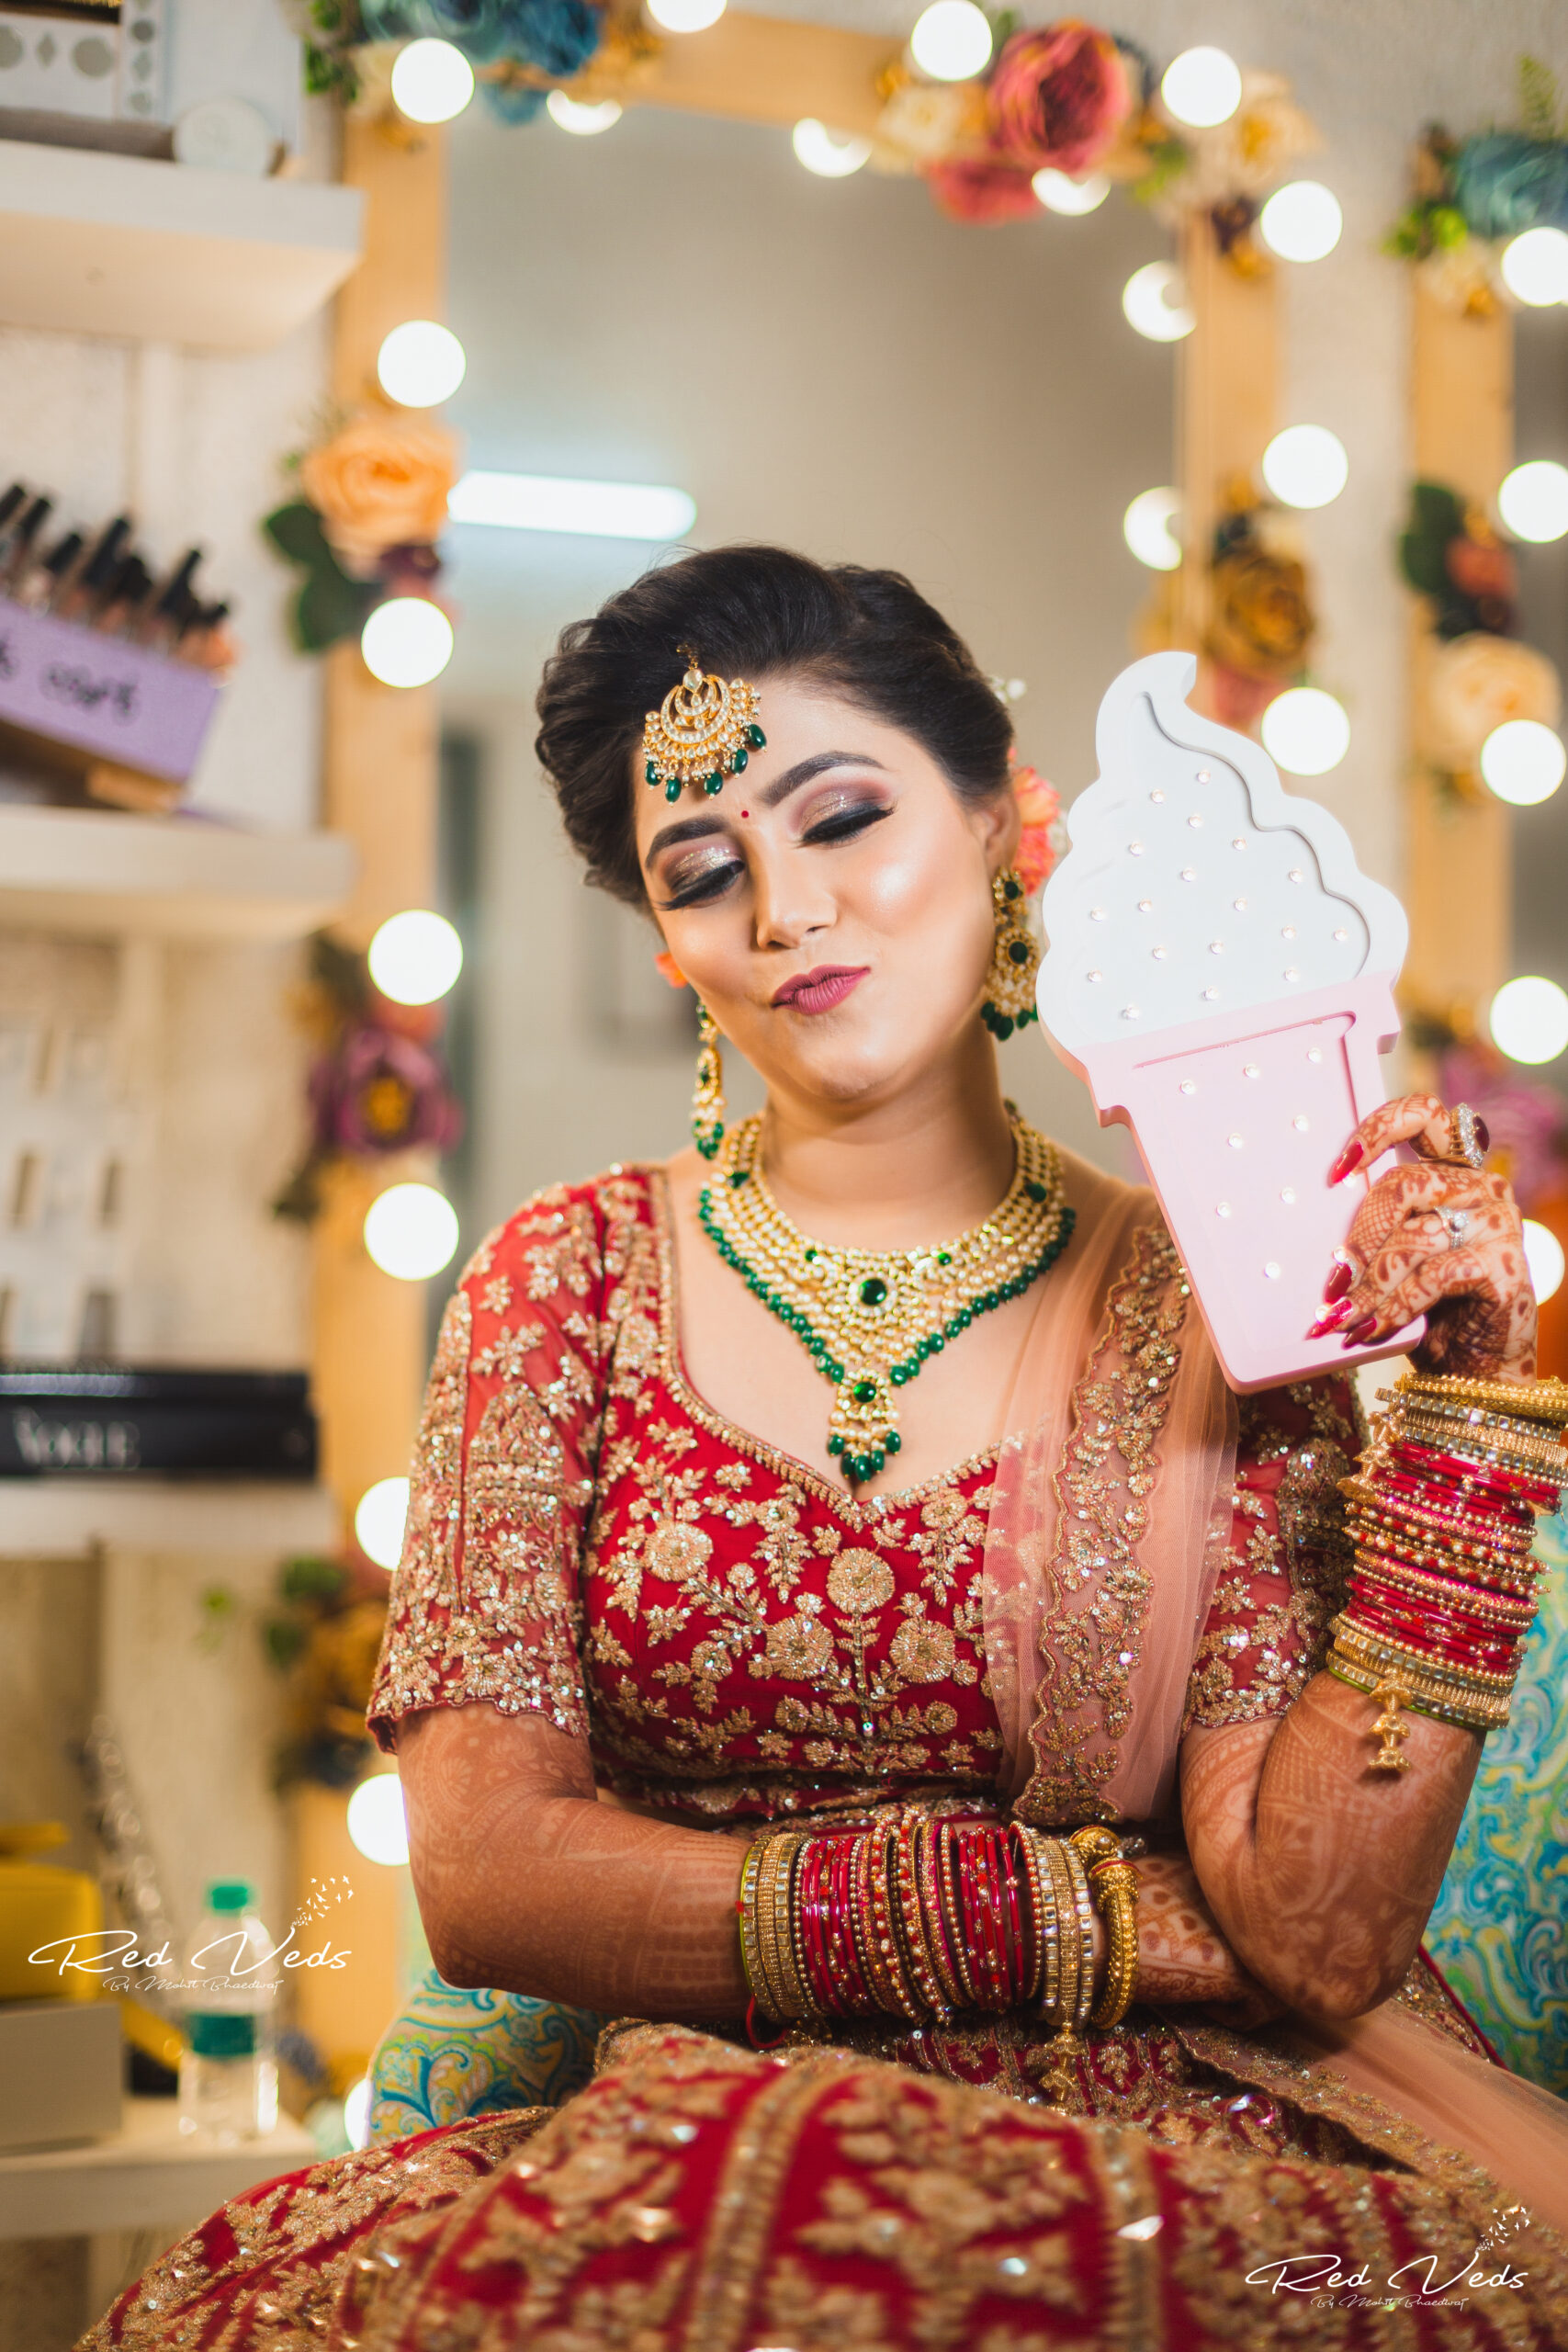 Susmitha shines in a bridal photoshoot​ | Times of India